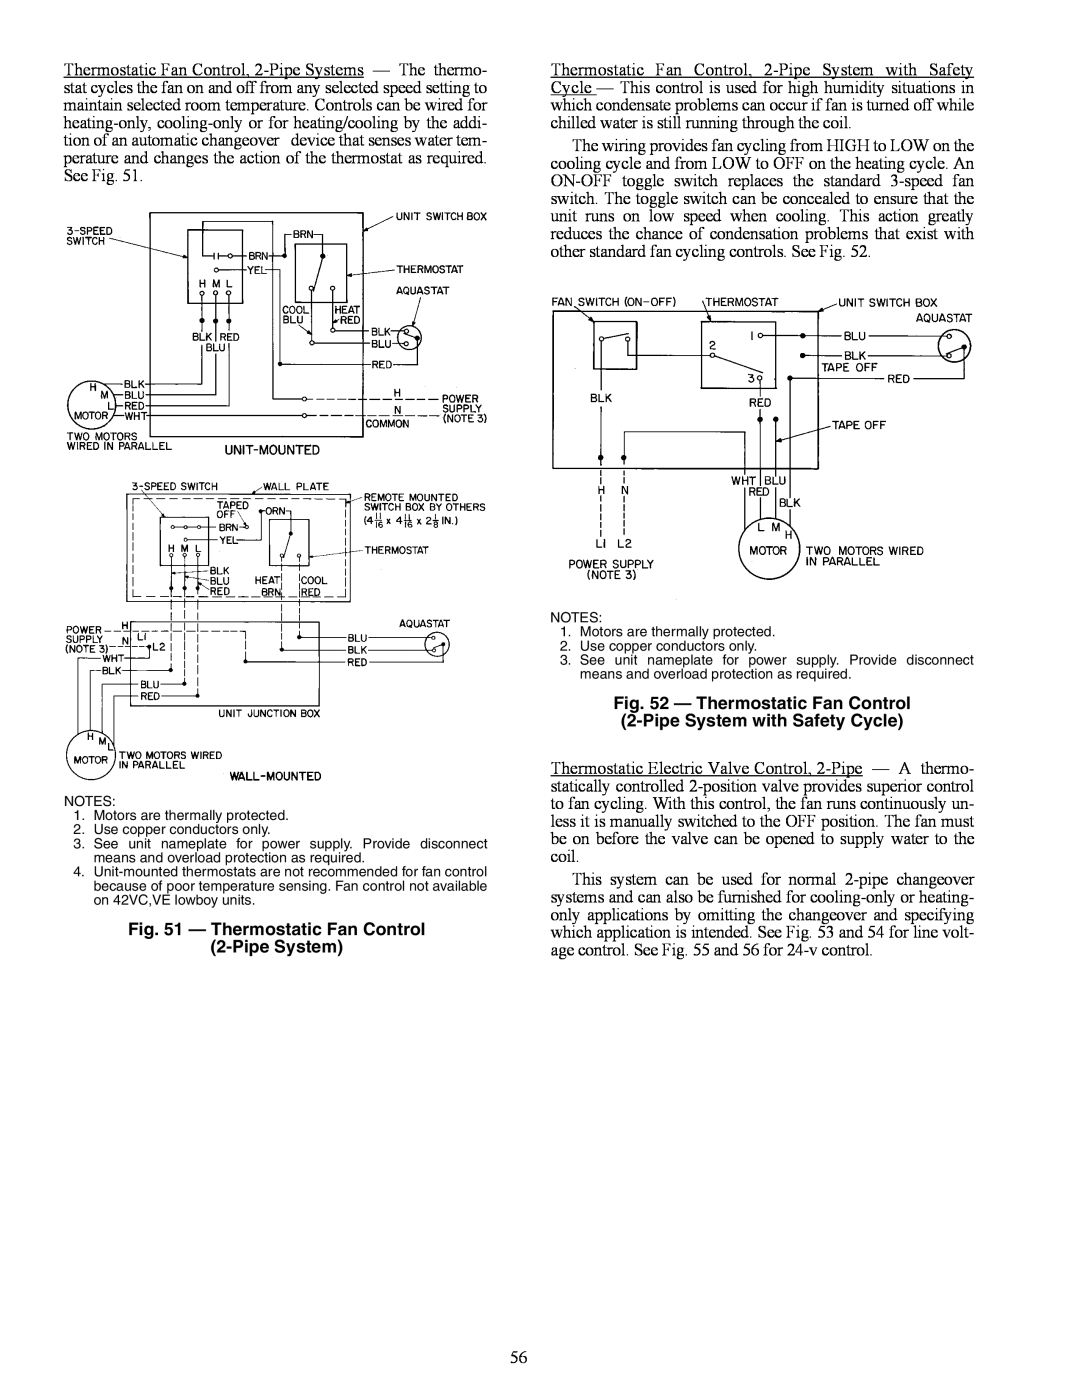 Carrier 42C, 42S, 42D, 42V specifications Thermostatic Fan Control 2-PipeSystem 